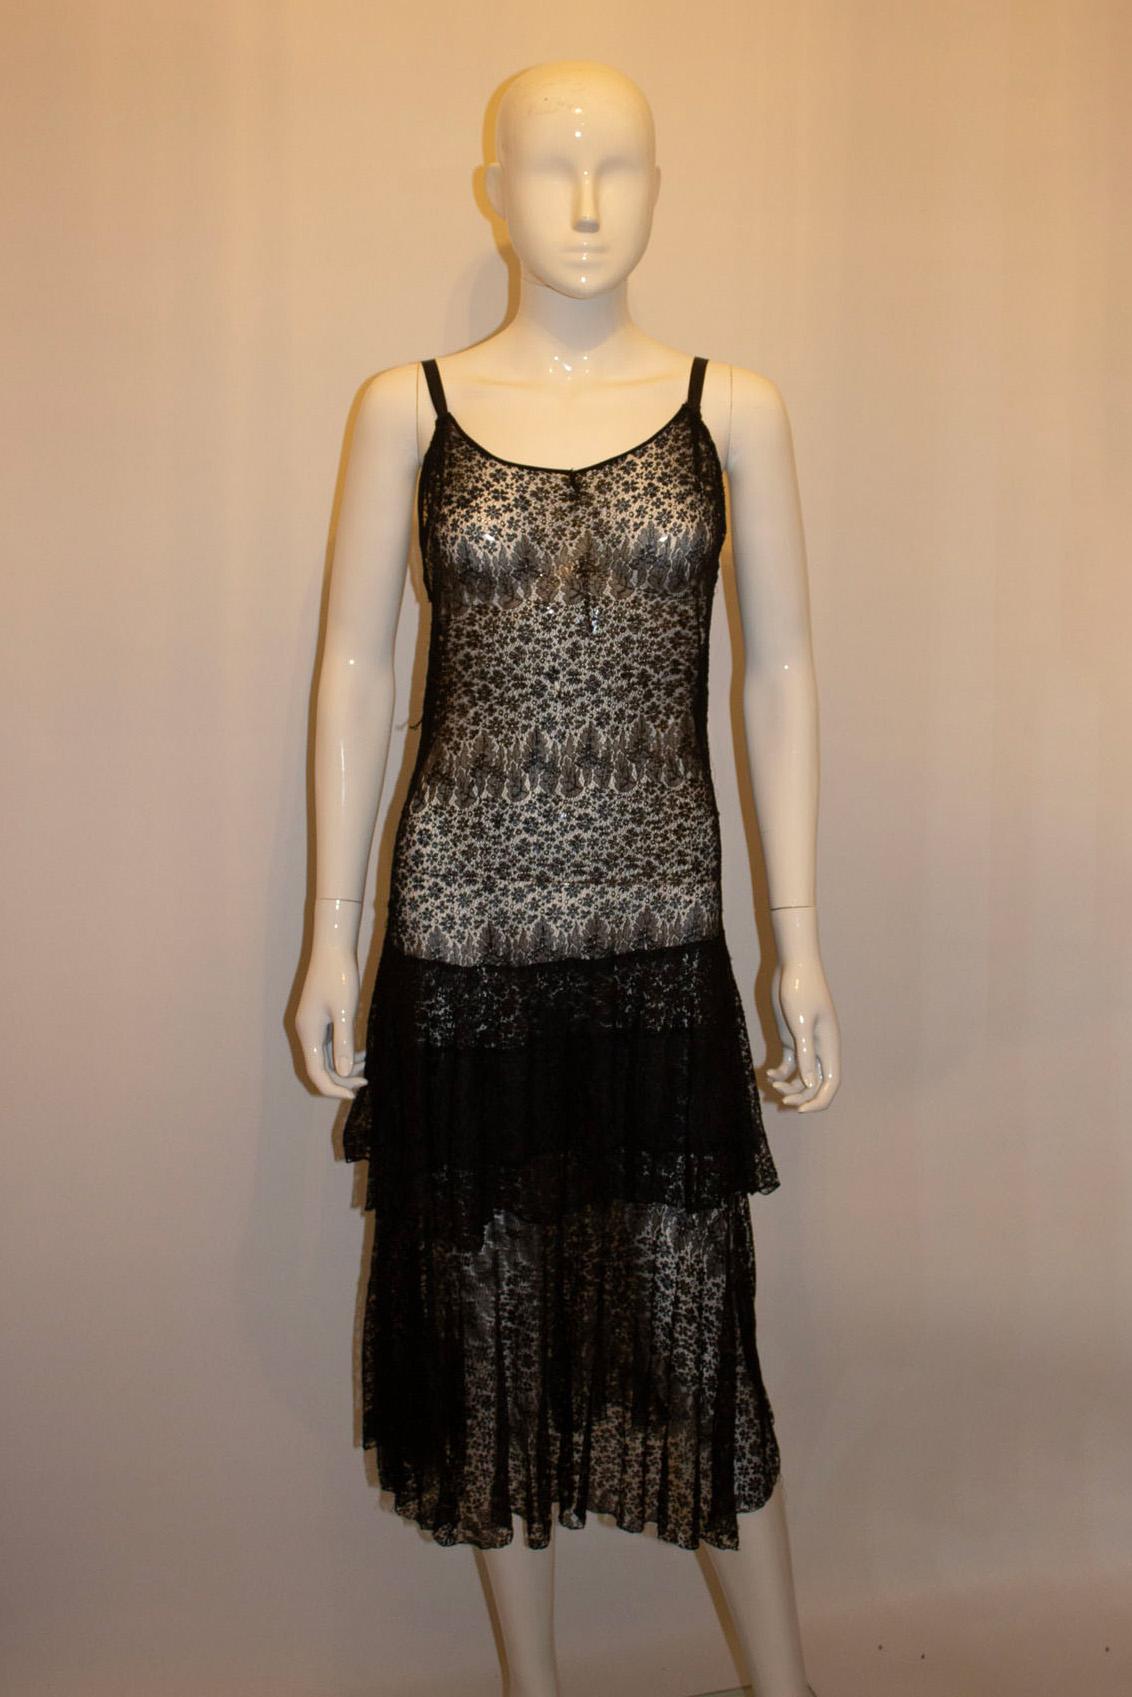 A wonderful  black lace evening dress , dating from the 1930s.  The dress would  be ideal for a party or dancing.
It has black ribbon straps. 
Measurements; Bust up to 38''. length 36''